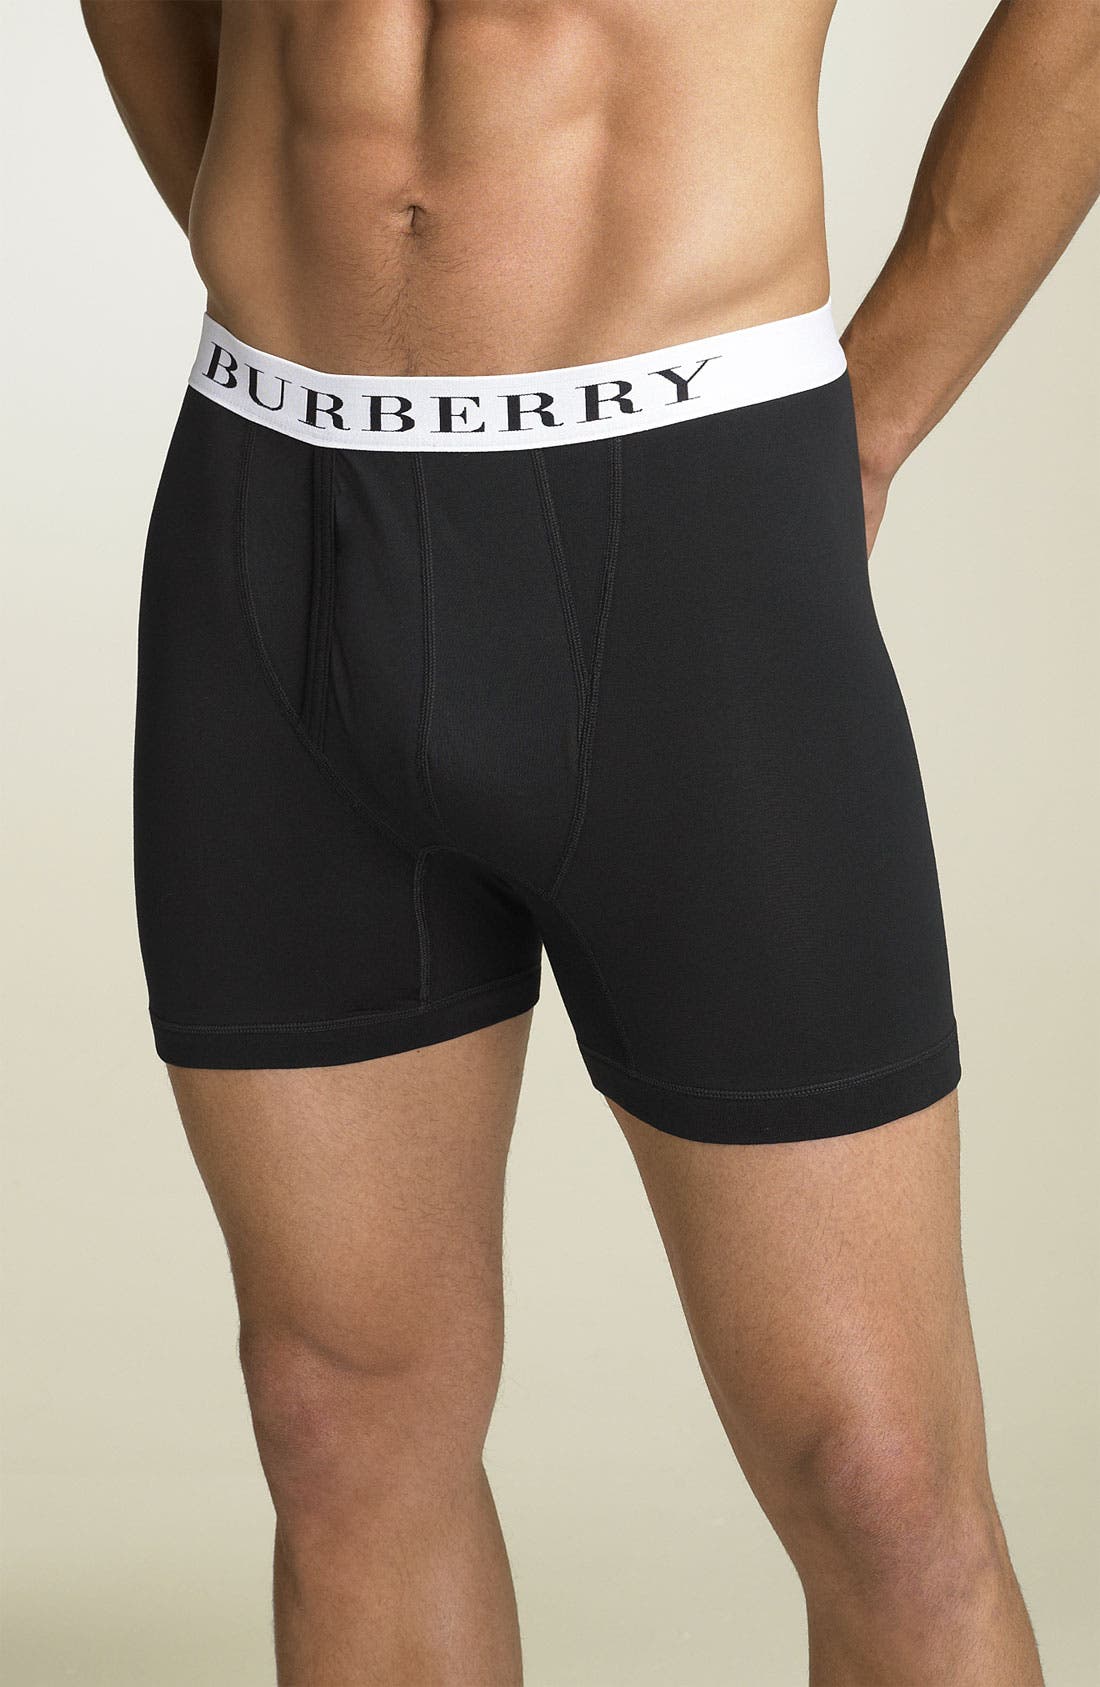 burberry boxers 3 pack